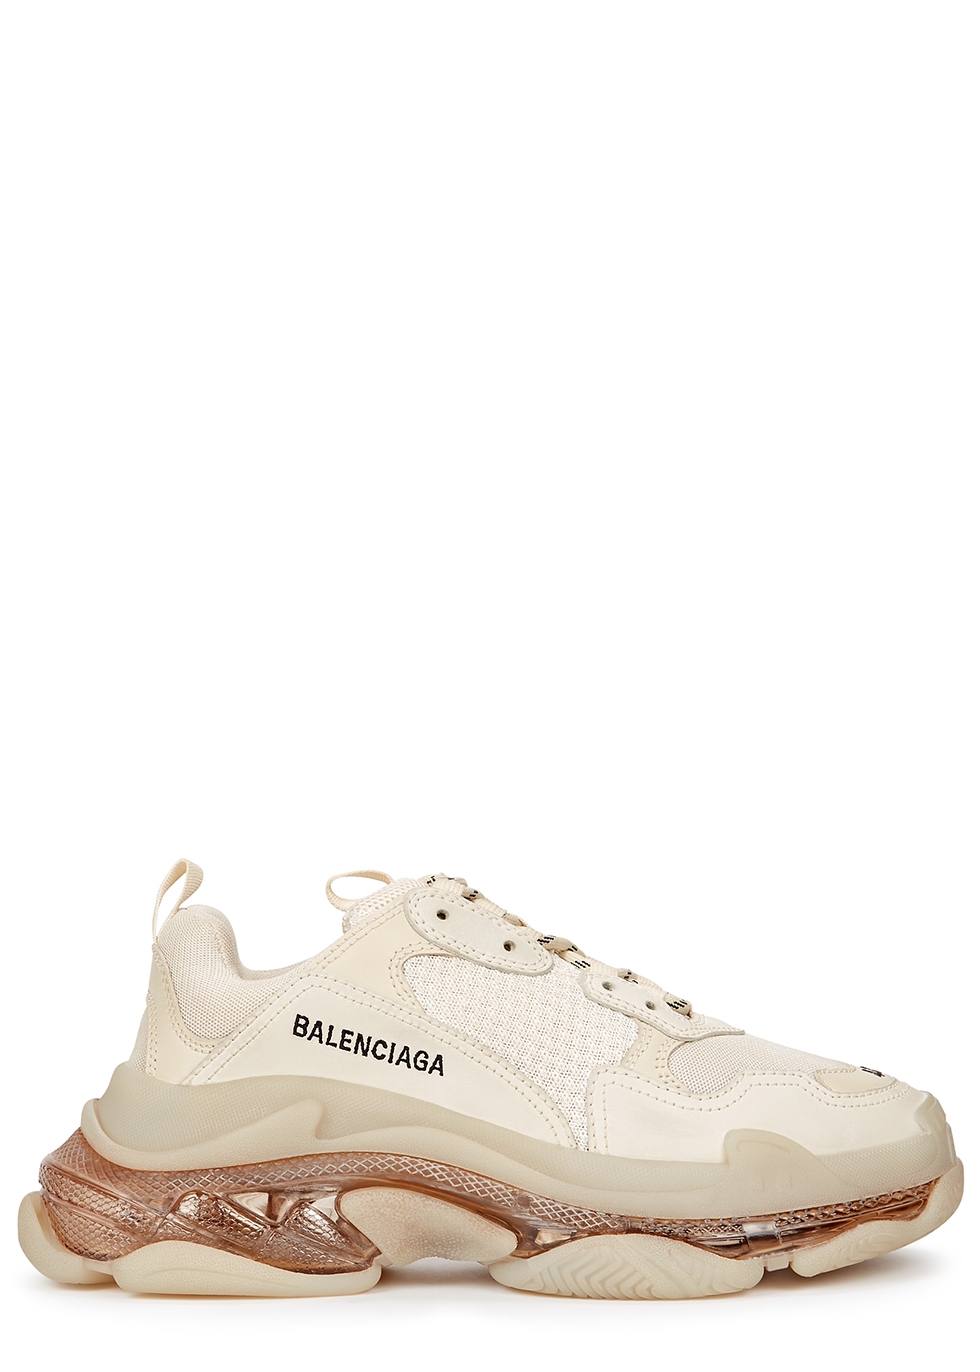 Balenciaga s Triple S Surfaces With Faux Hypebeast